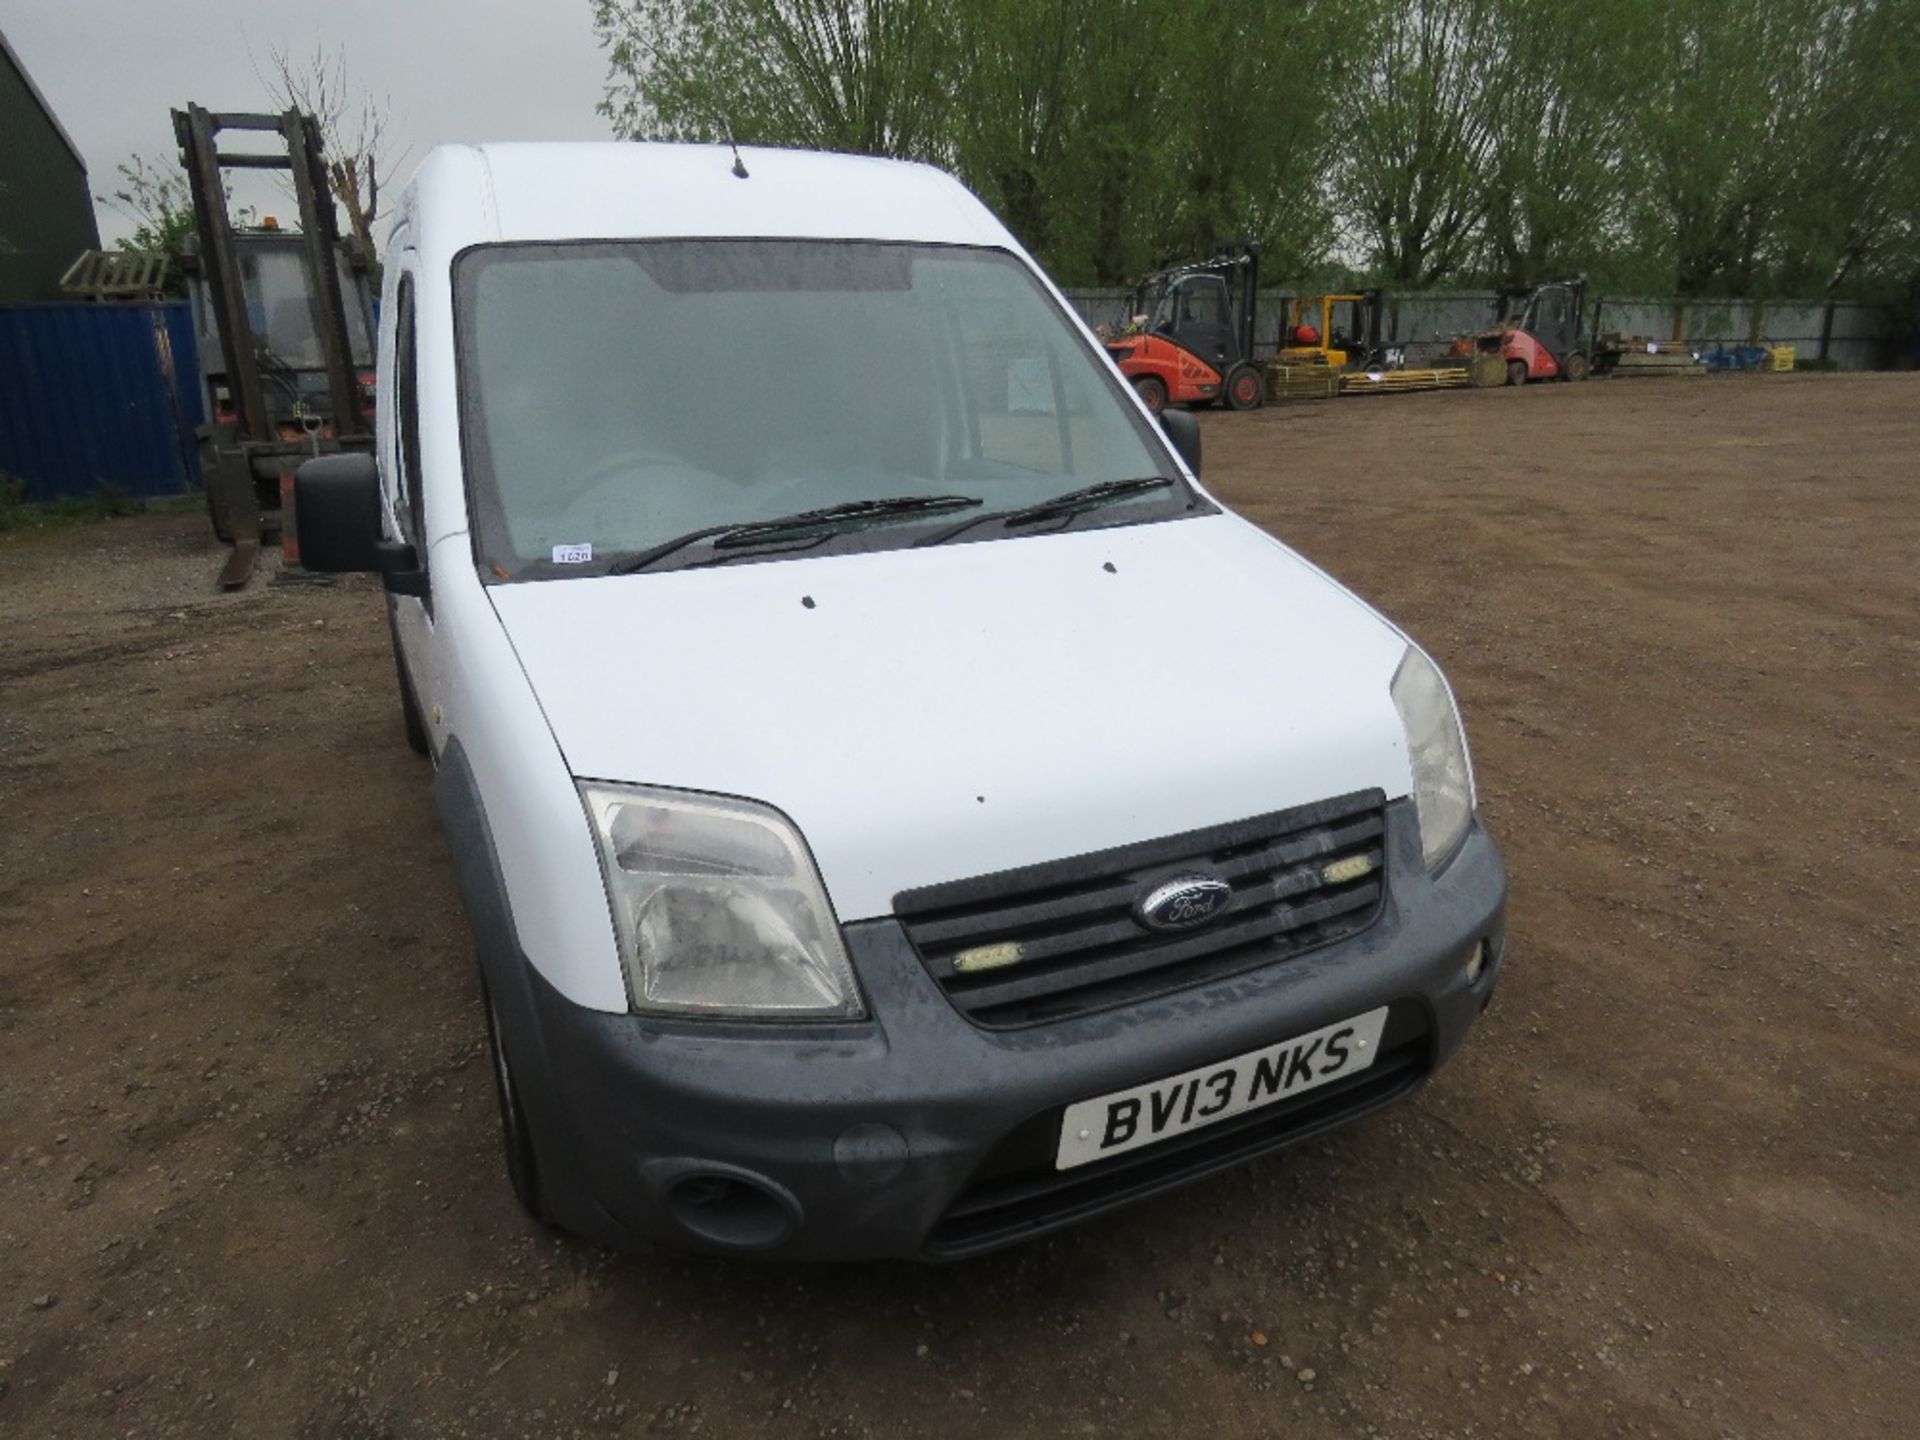 FORD TRANSIT CONNECT PANEL VAN REG:BV13 NKS 1.8LITRE. HIGH ROOF LWB. 83K REC MILES APPROX. WITH V5 A - Image 13 of 26